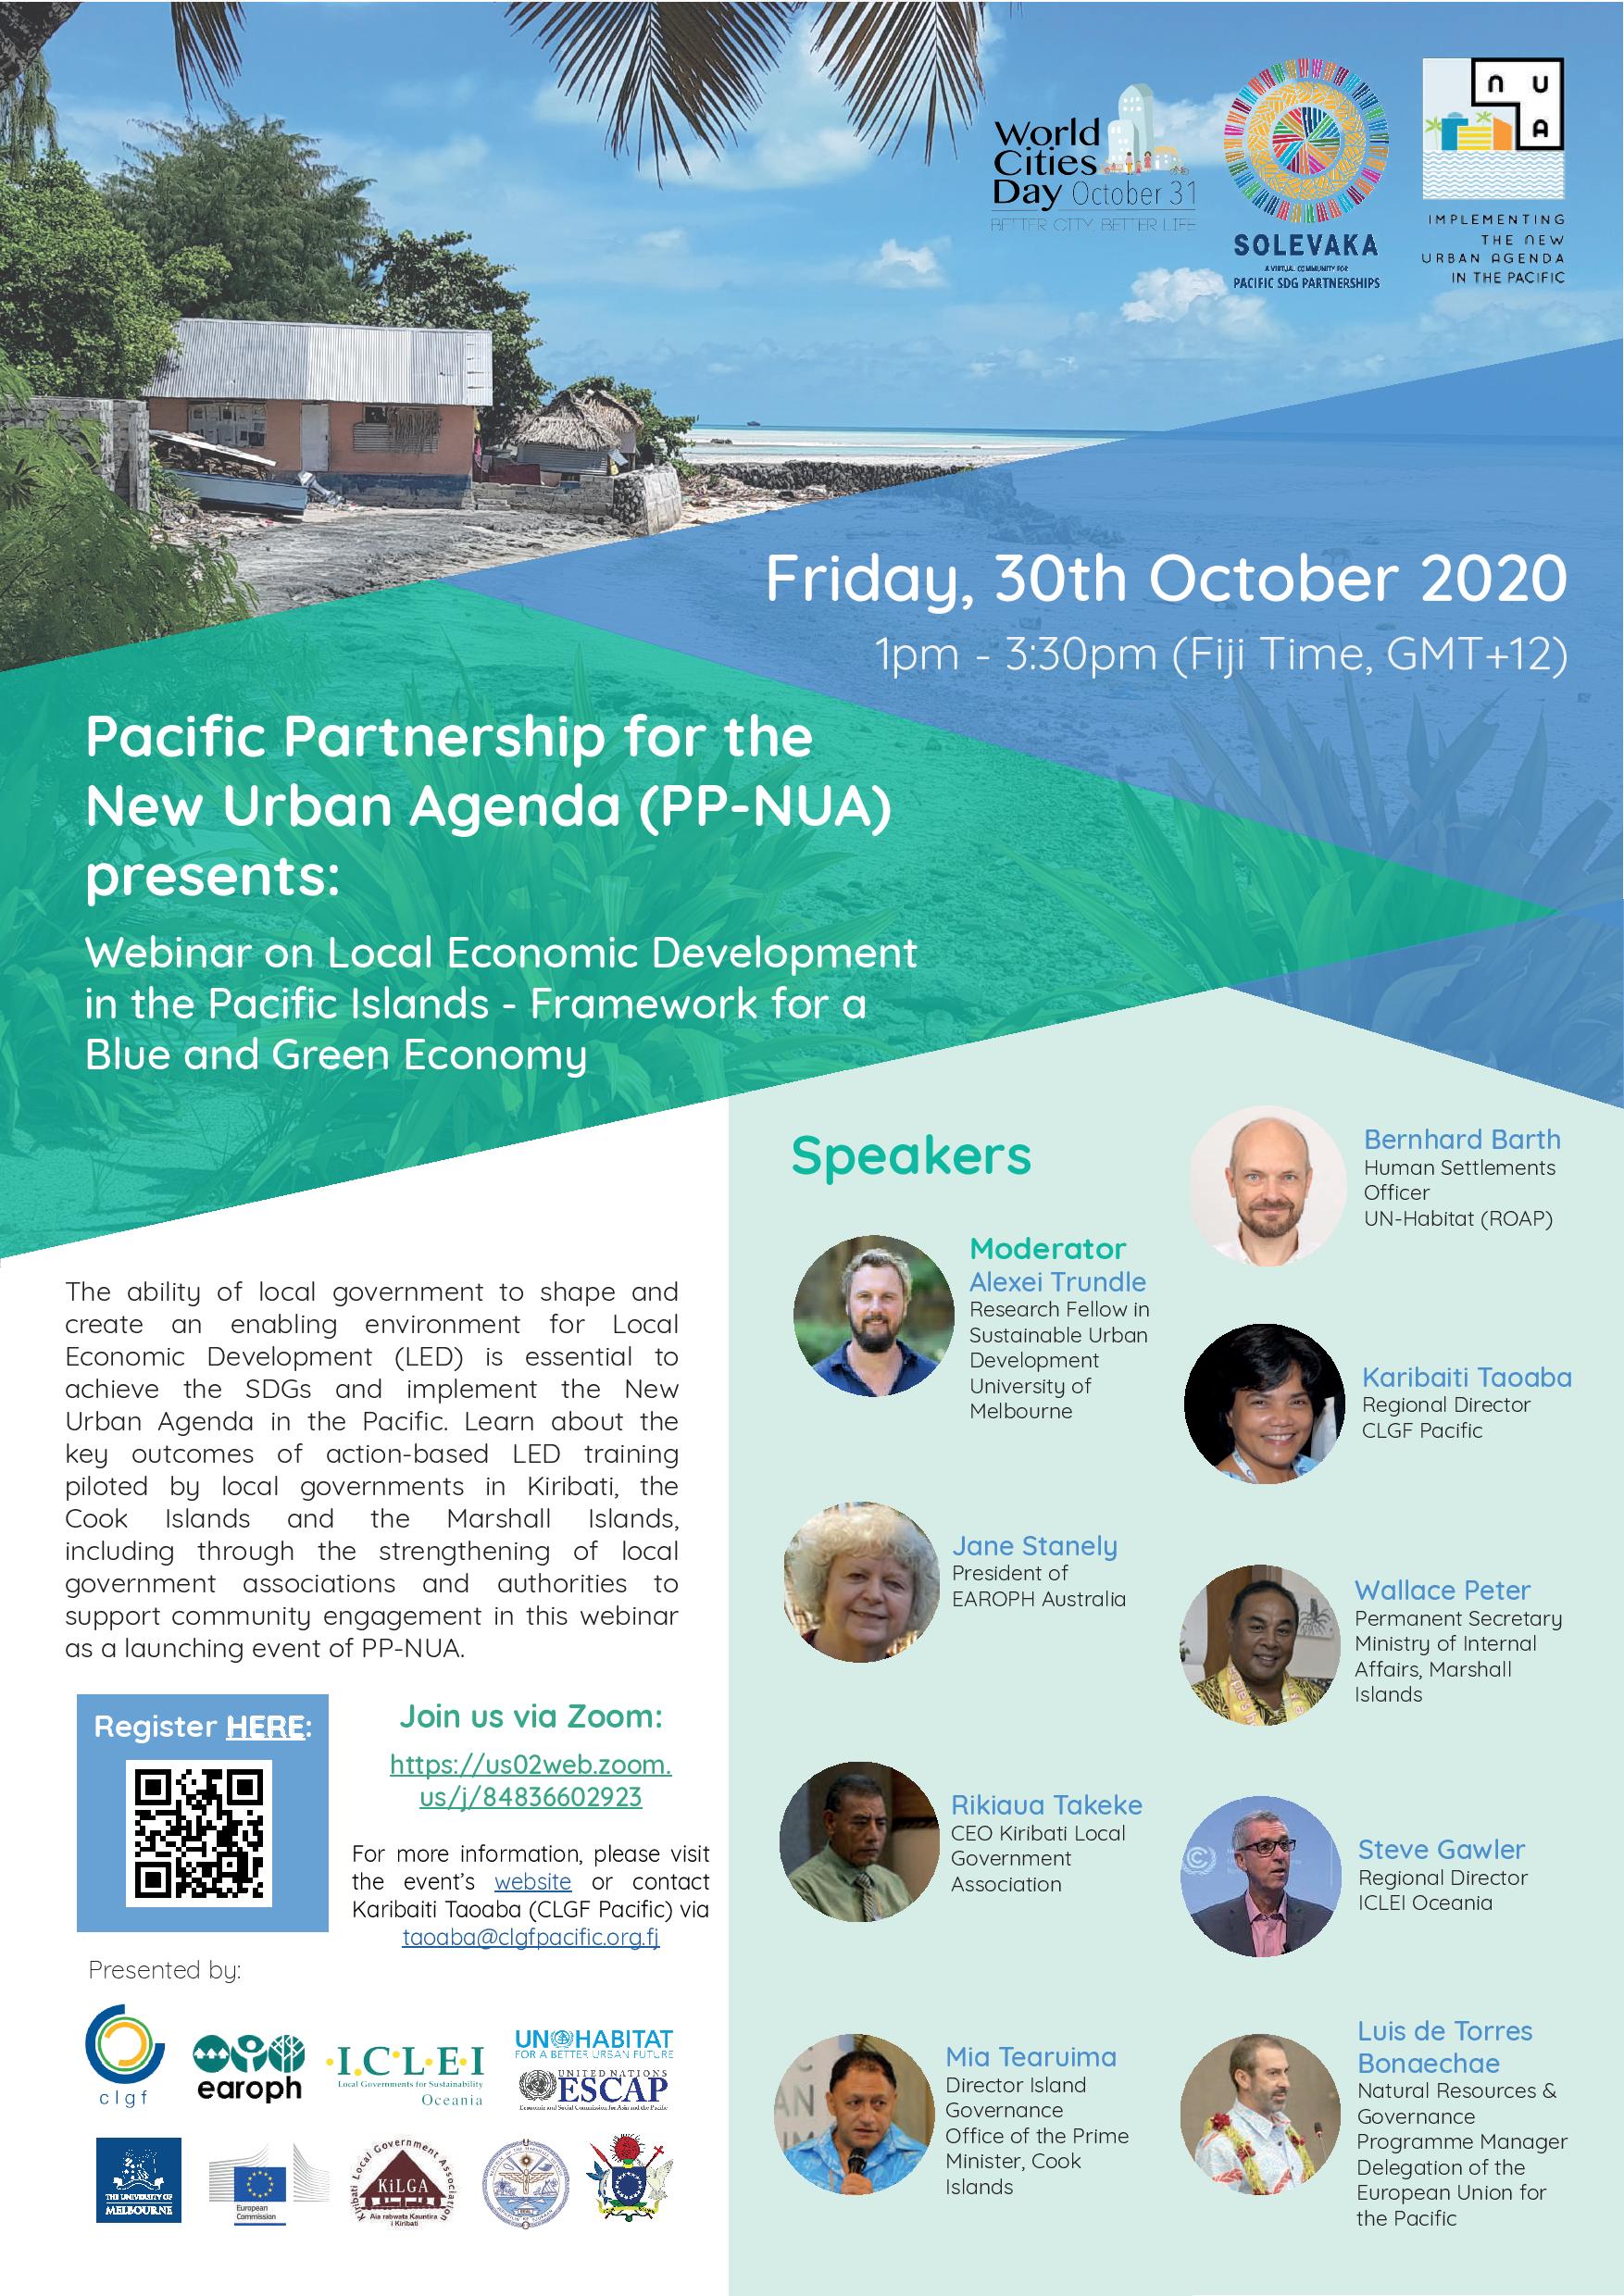 Pacific Partnership for the New Urban Agenda